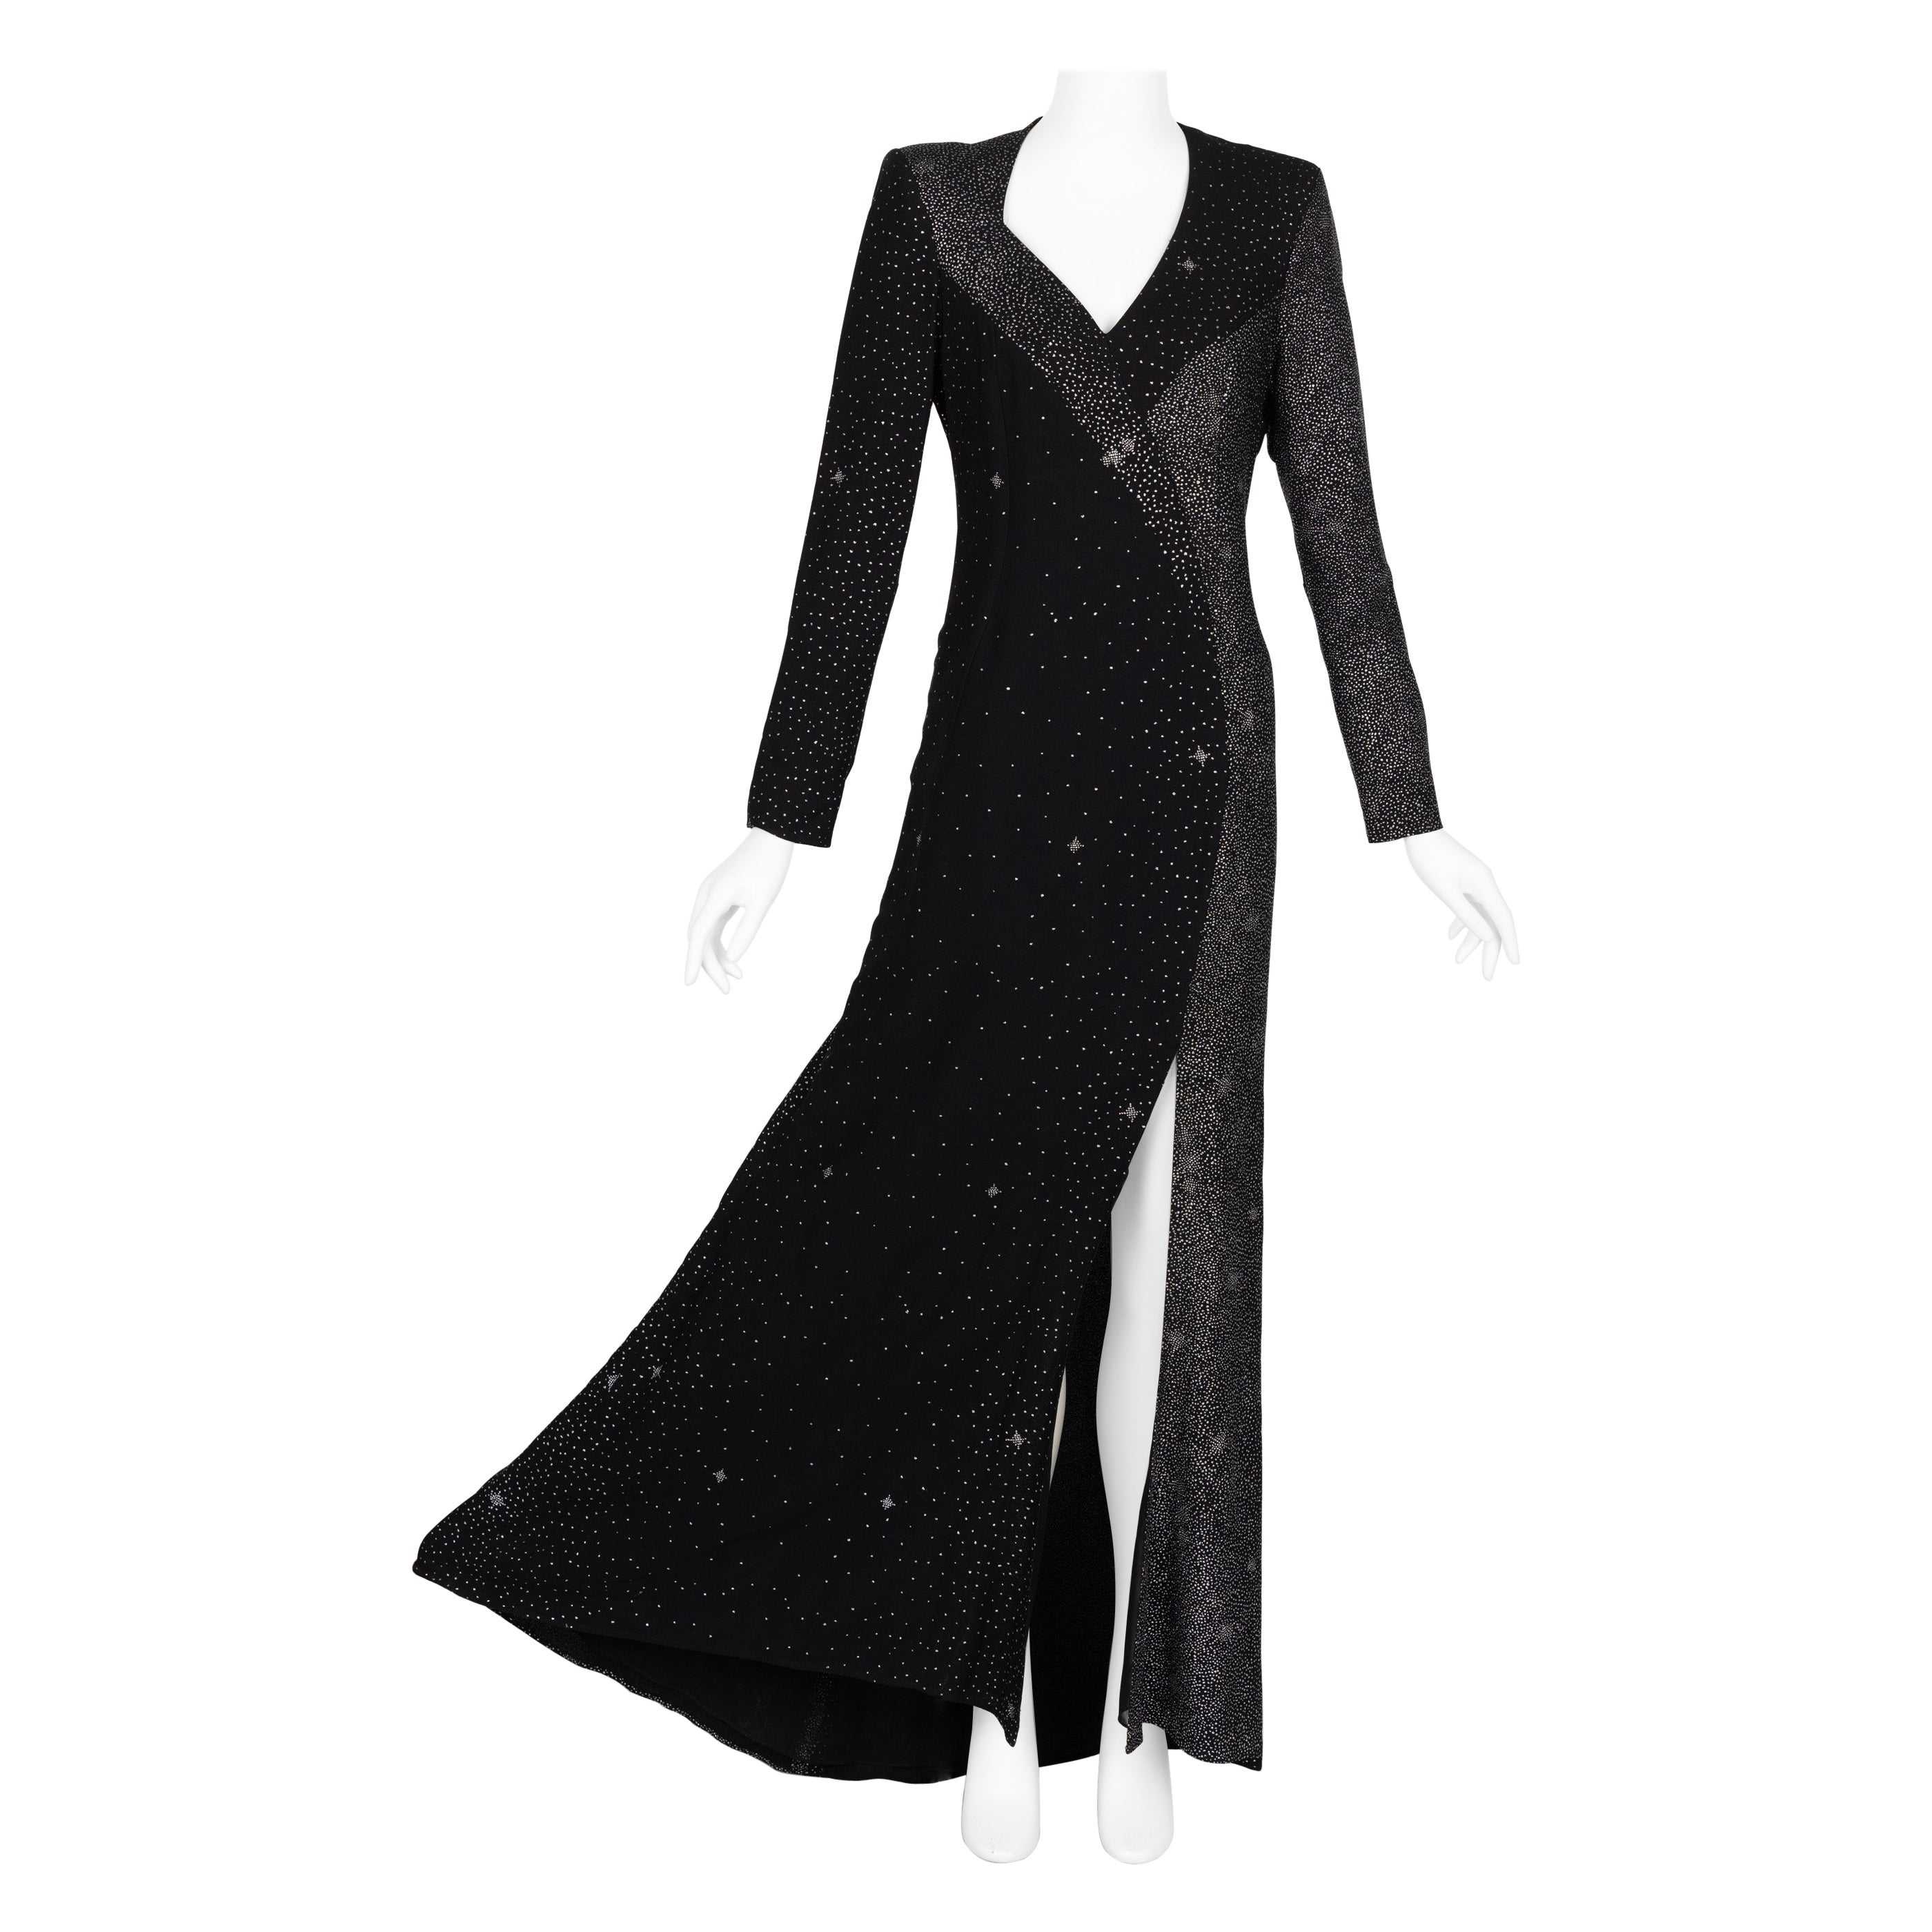 Christian Lacroix Midnight Sparkle Runway Gown FW 98/99 For Sale